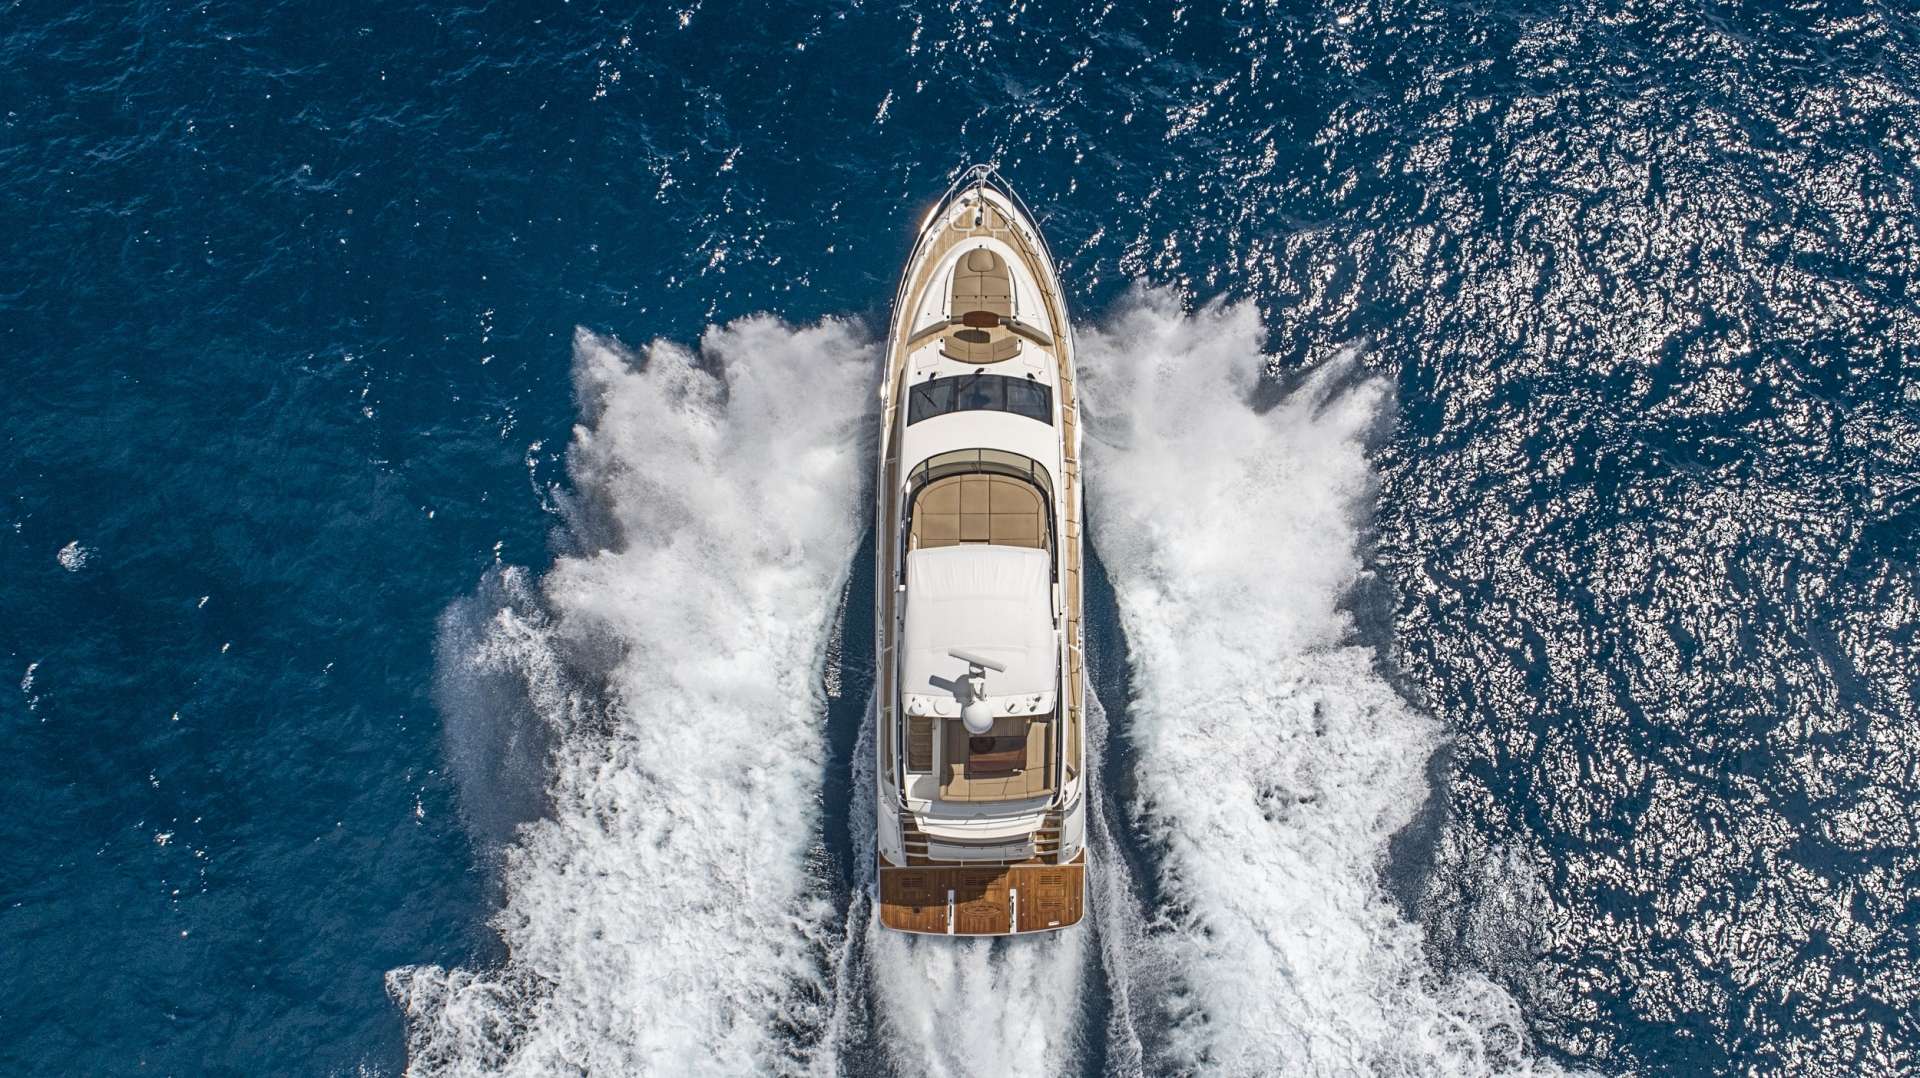 Motor Yacht 'MR. GV' View from above, 5 PAX, 65.00 Ft, 19.00 Meters, Built 2016, Sea Ray